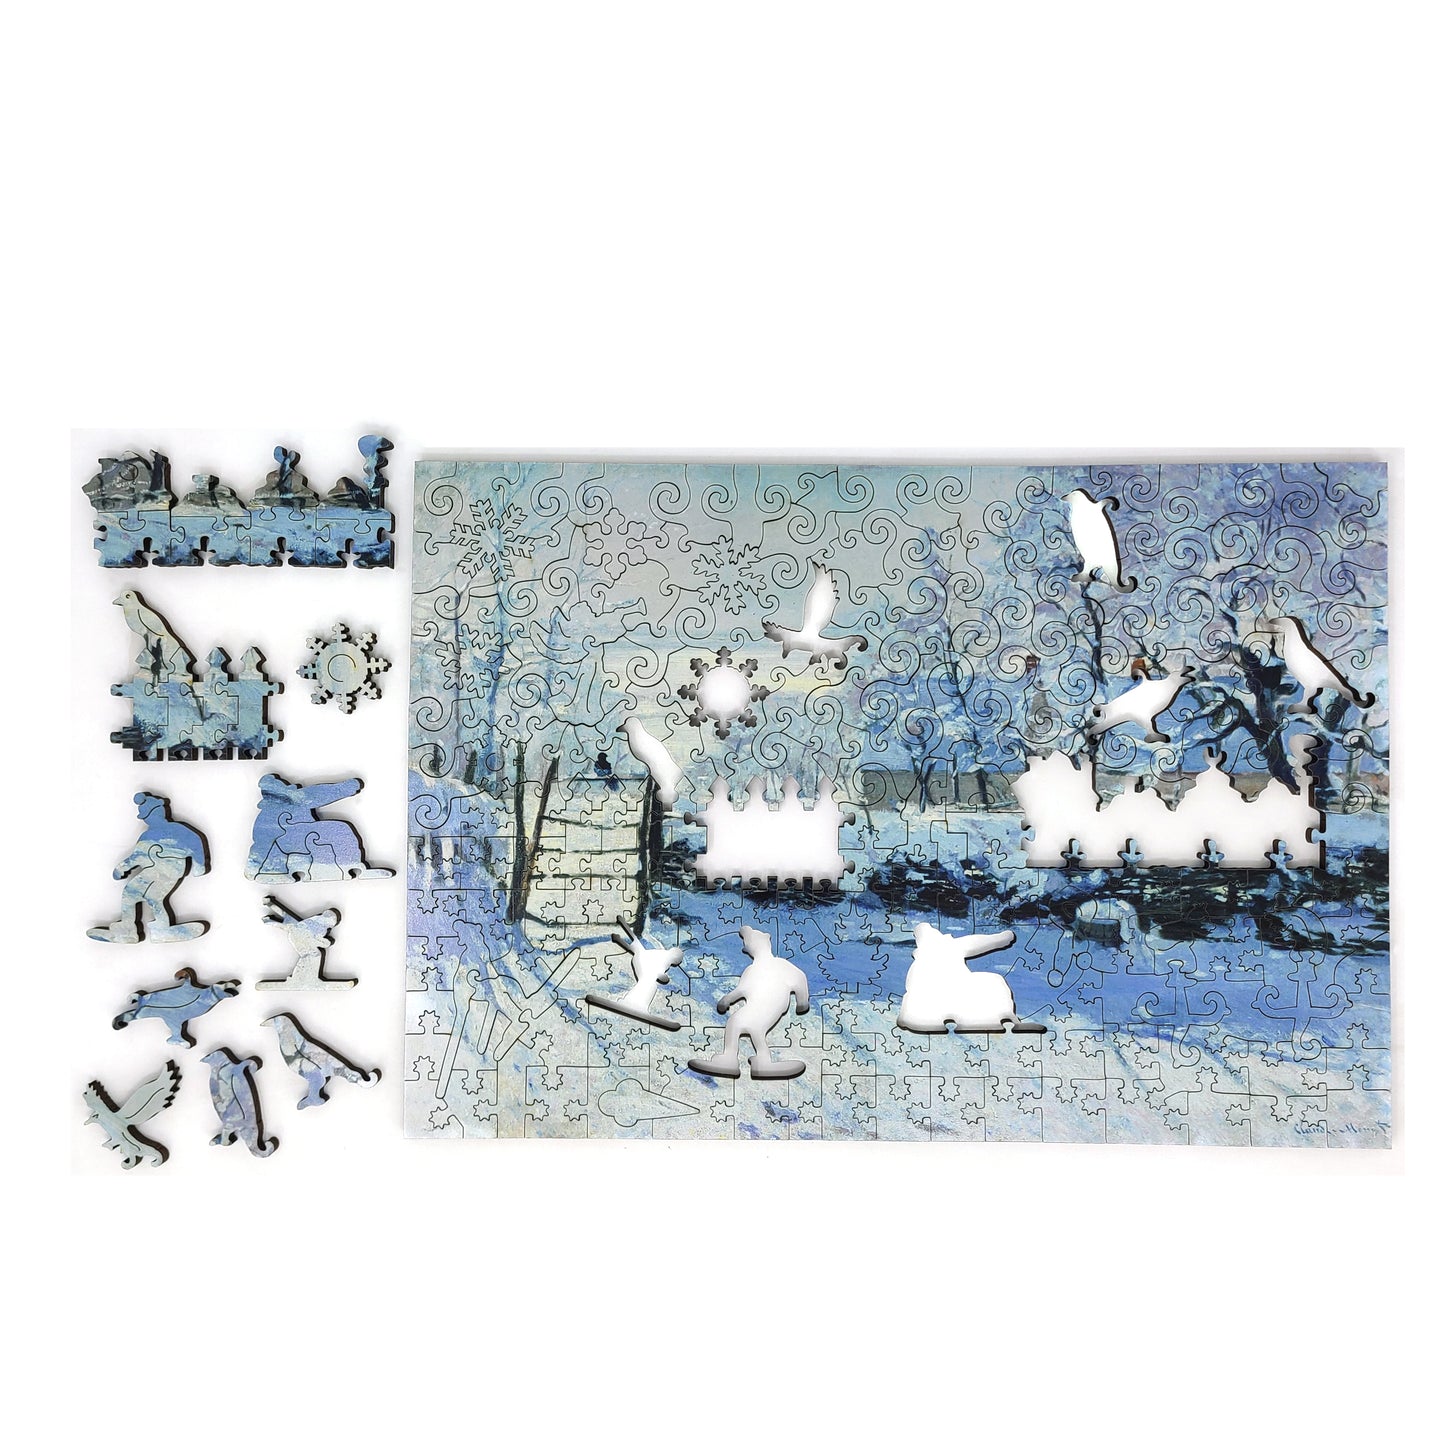 Wooden Jigsaw Puzzle with Uniquely Shaped Pieces for Adults - 210 Pieces - The Magpie